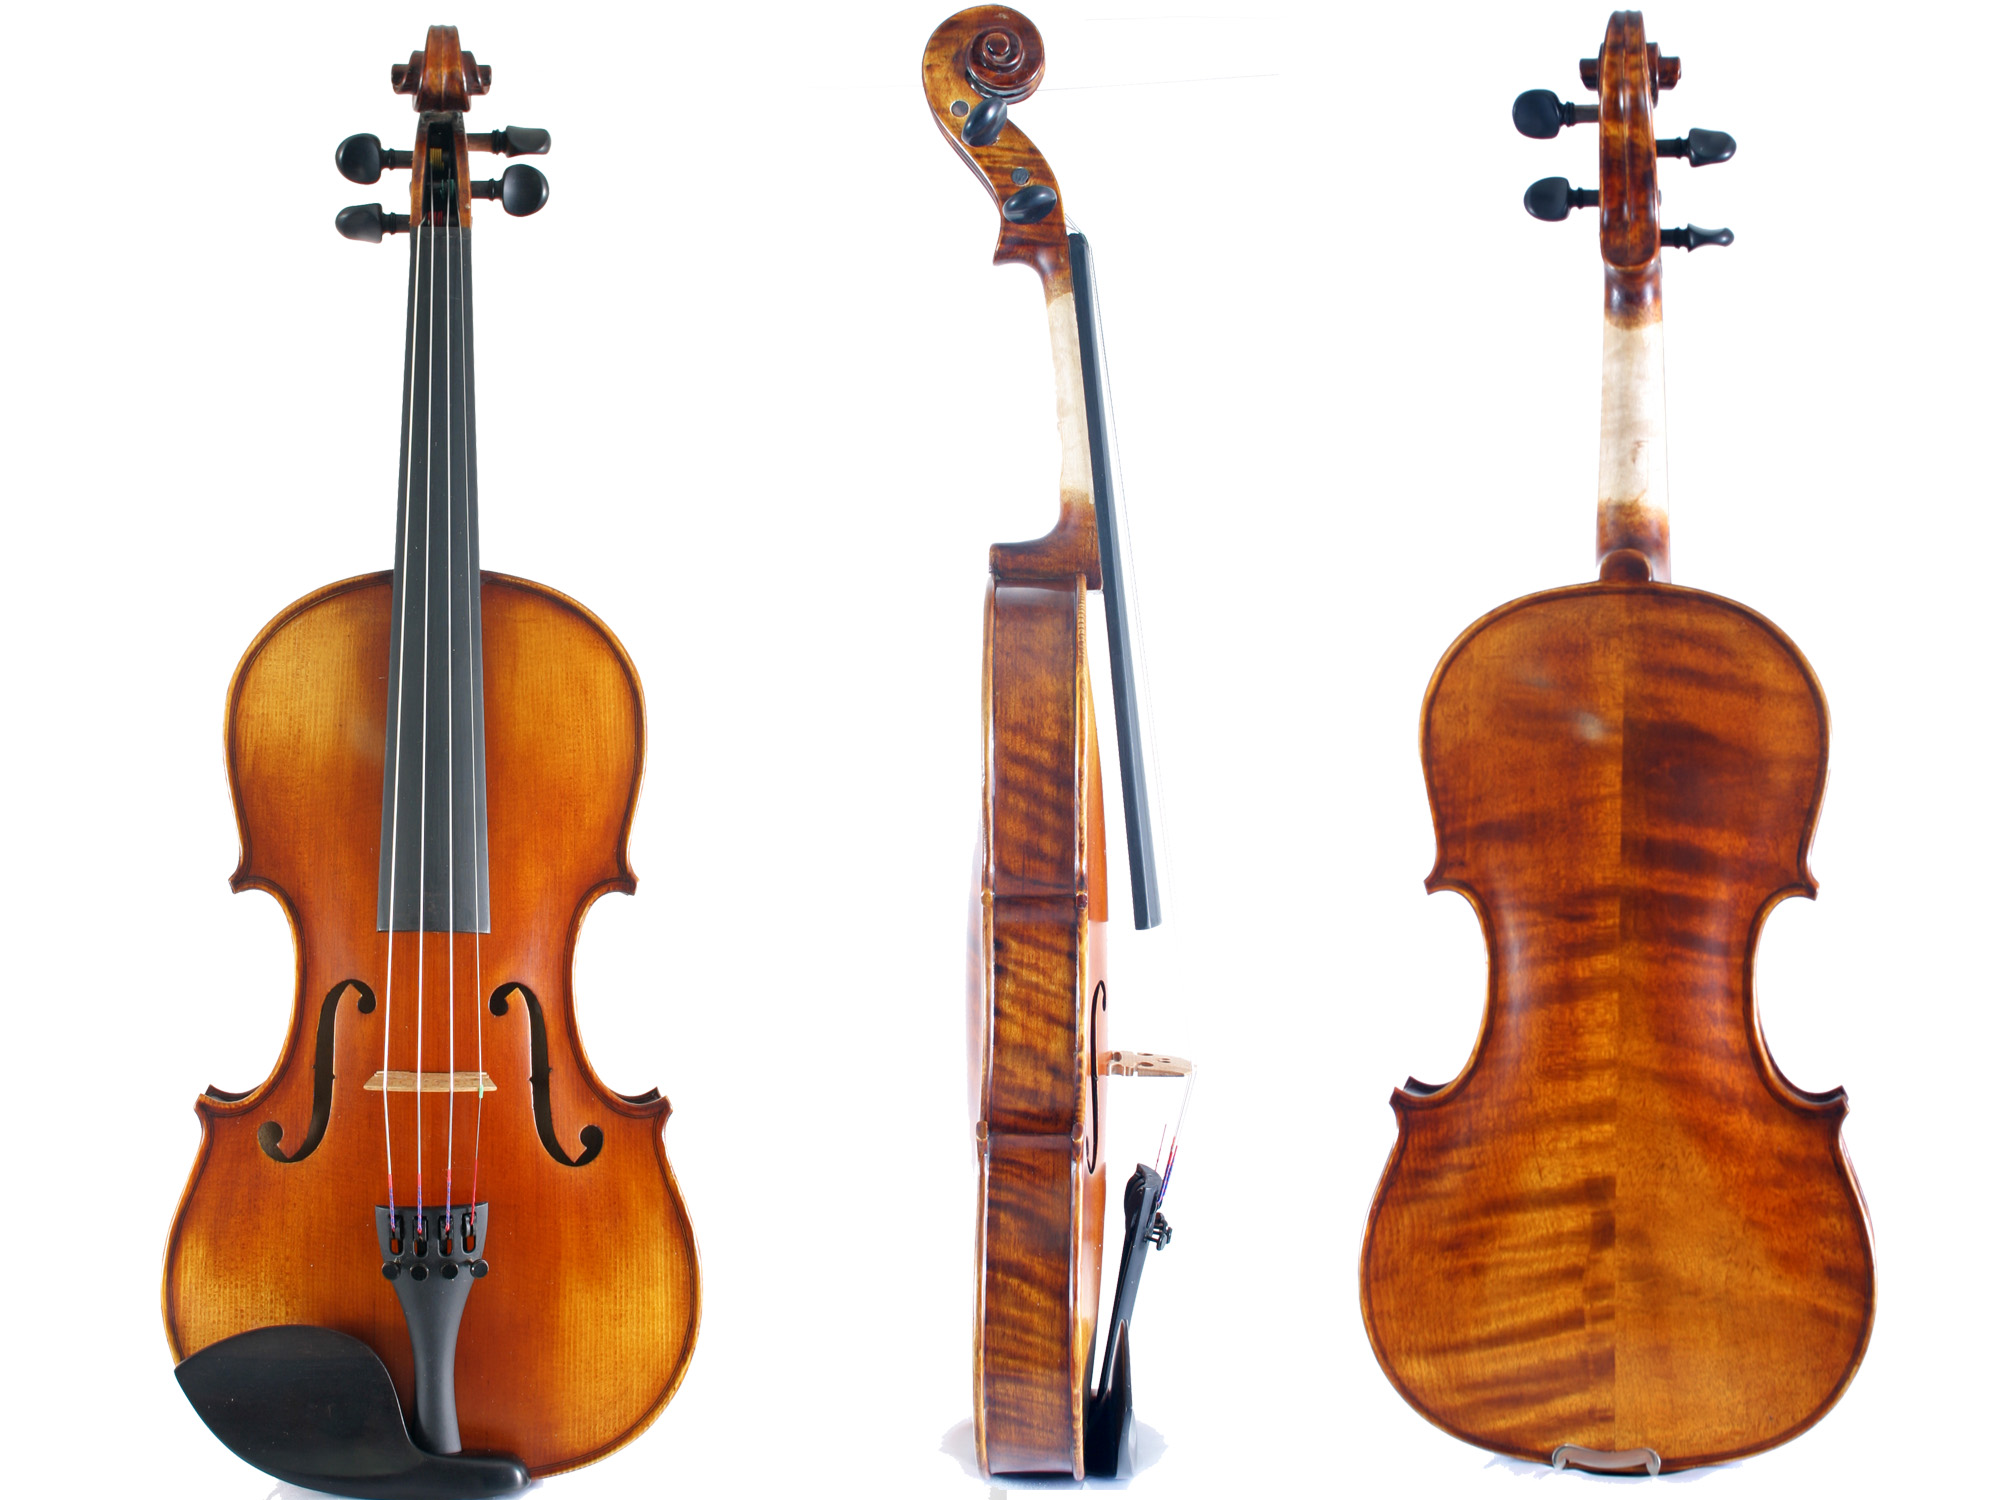 Images of Violin | 2000x1500